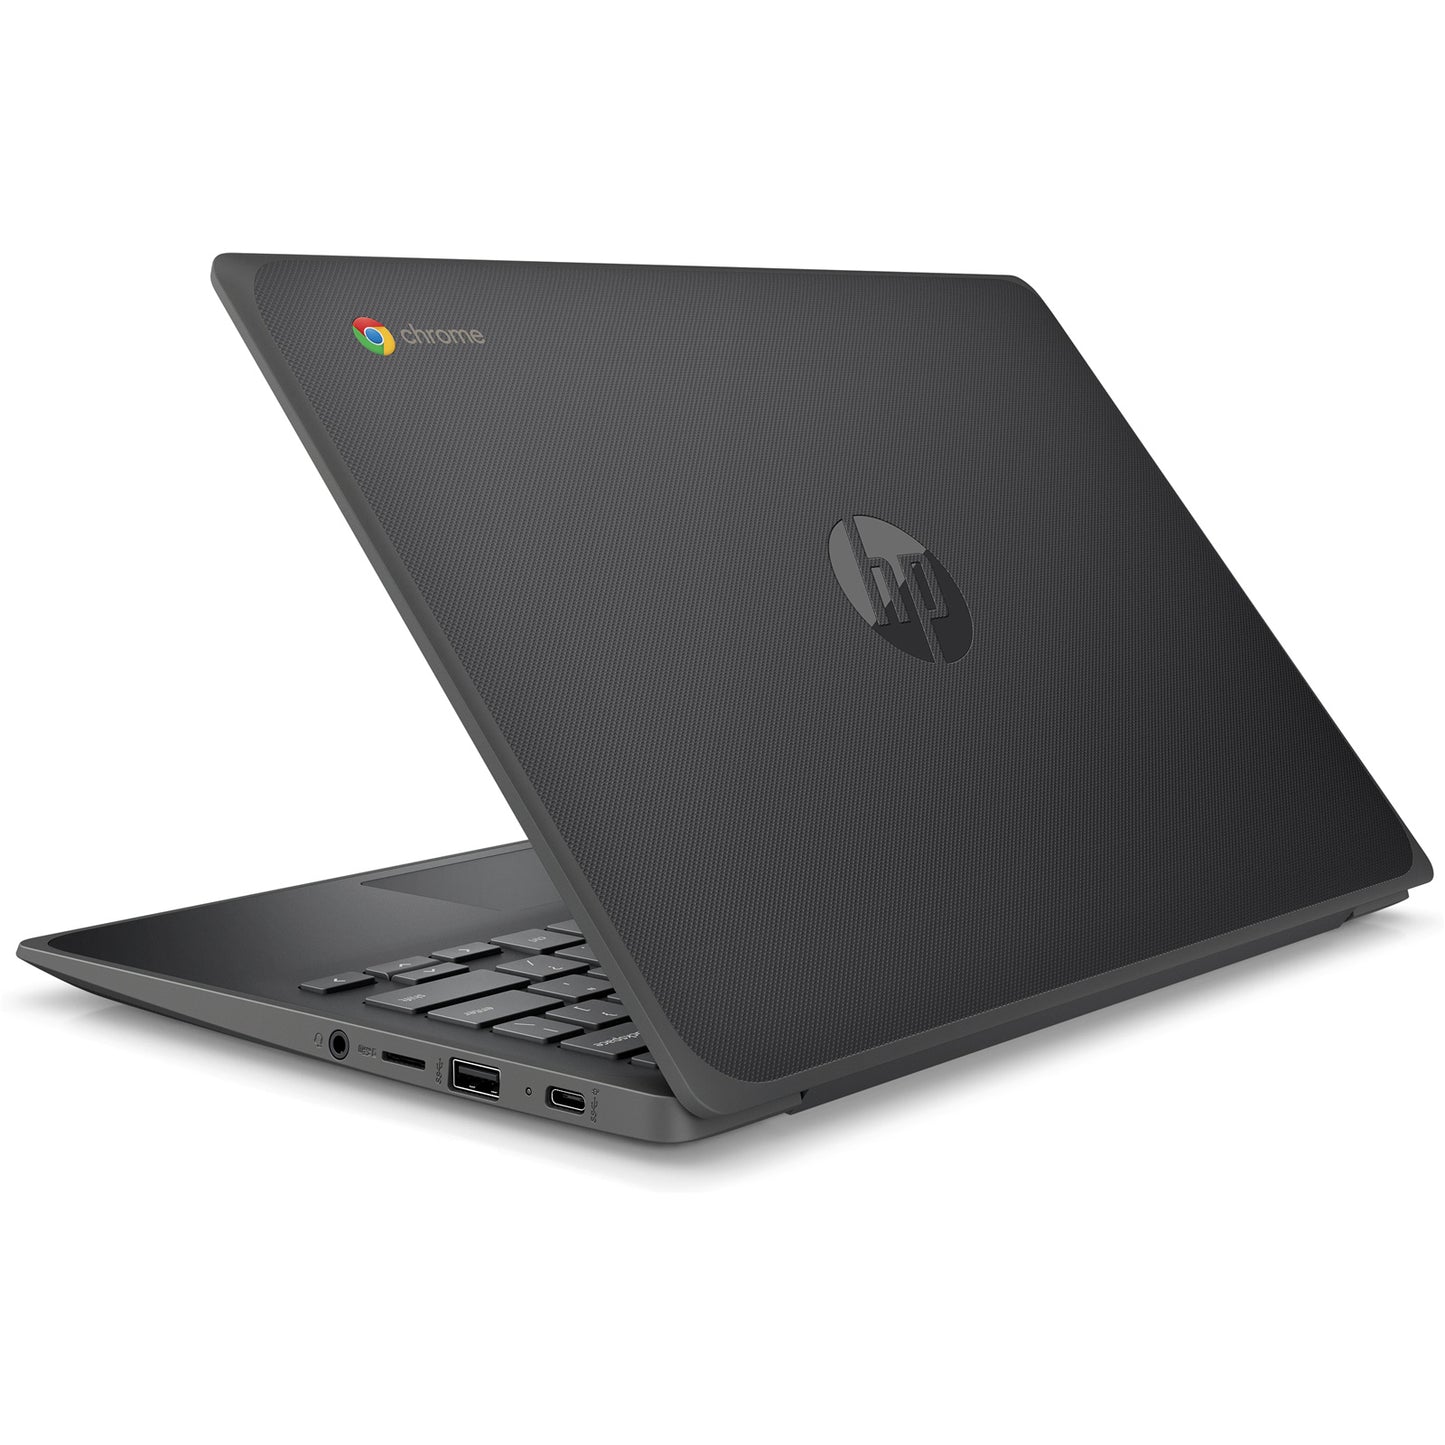 Hp Chromebook 11 G8 | Official Playstore | Type C Charger | Latest Updates | Chromebook